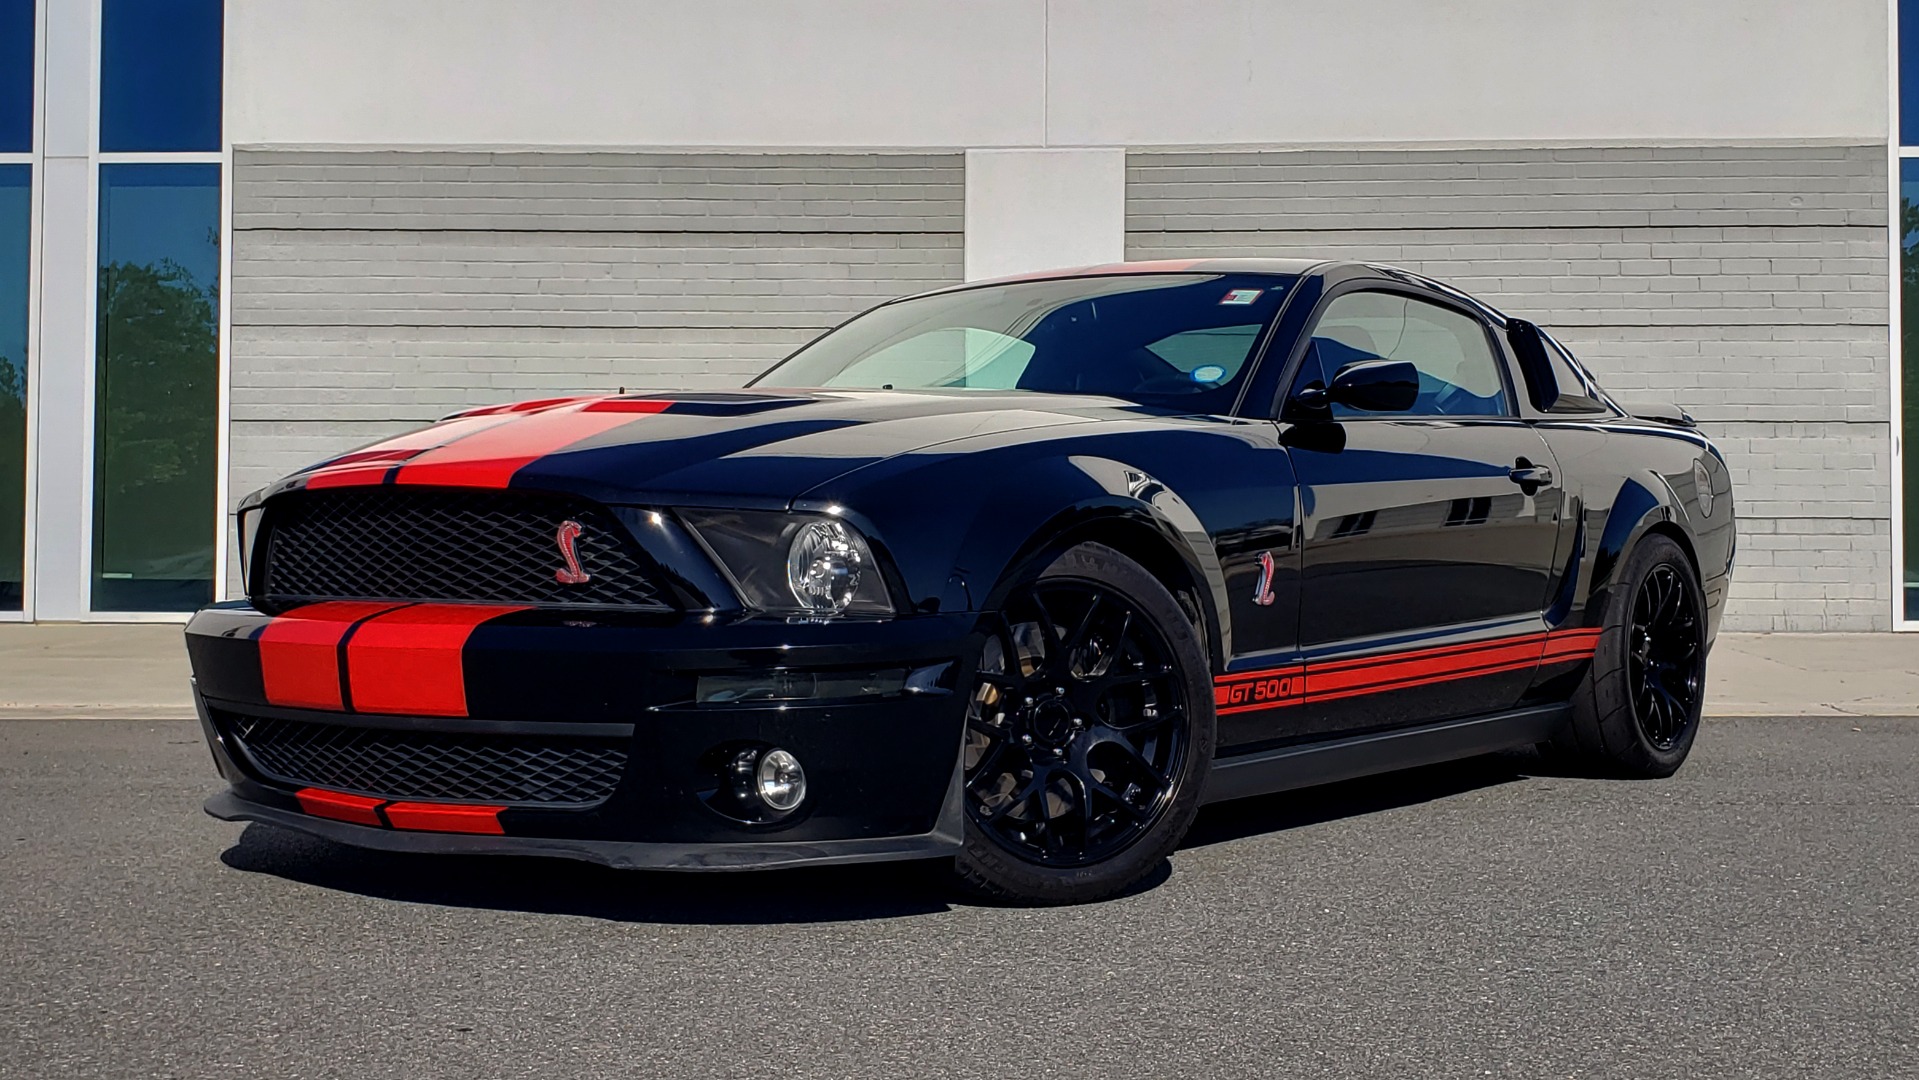 Used 2009 Ford MUSTANG SHELBY GT500 / RED SNAKE EDITION / UPGRADED 750RWHP / NAV / SHAKER SND for sale Sold at Formula Imports in Charlotte NC 28227 2